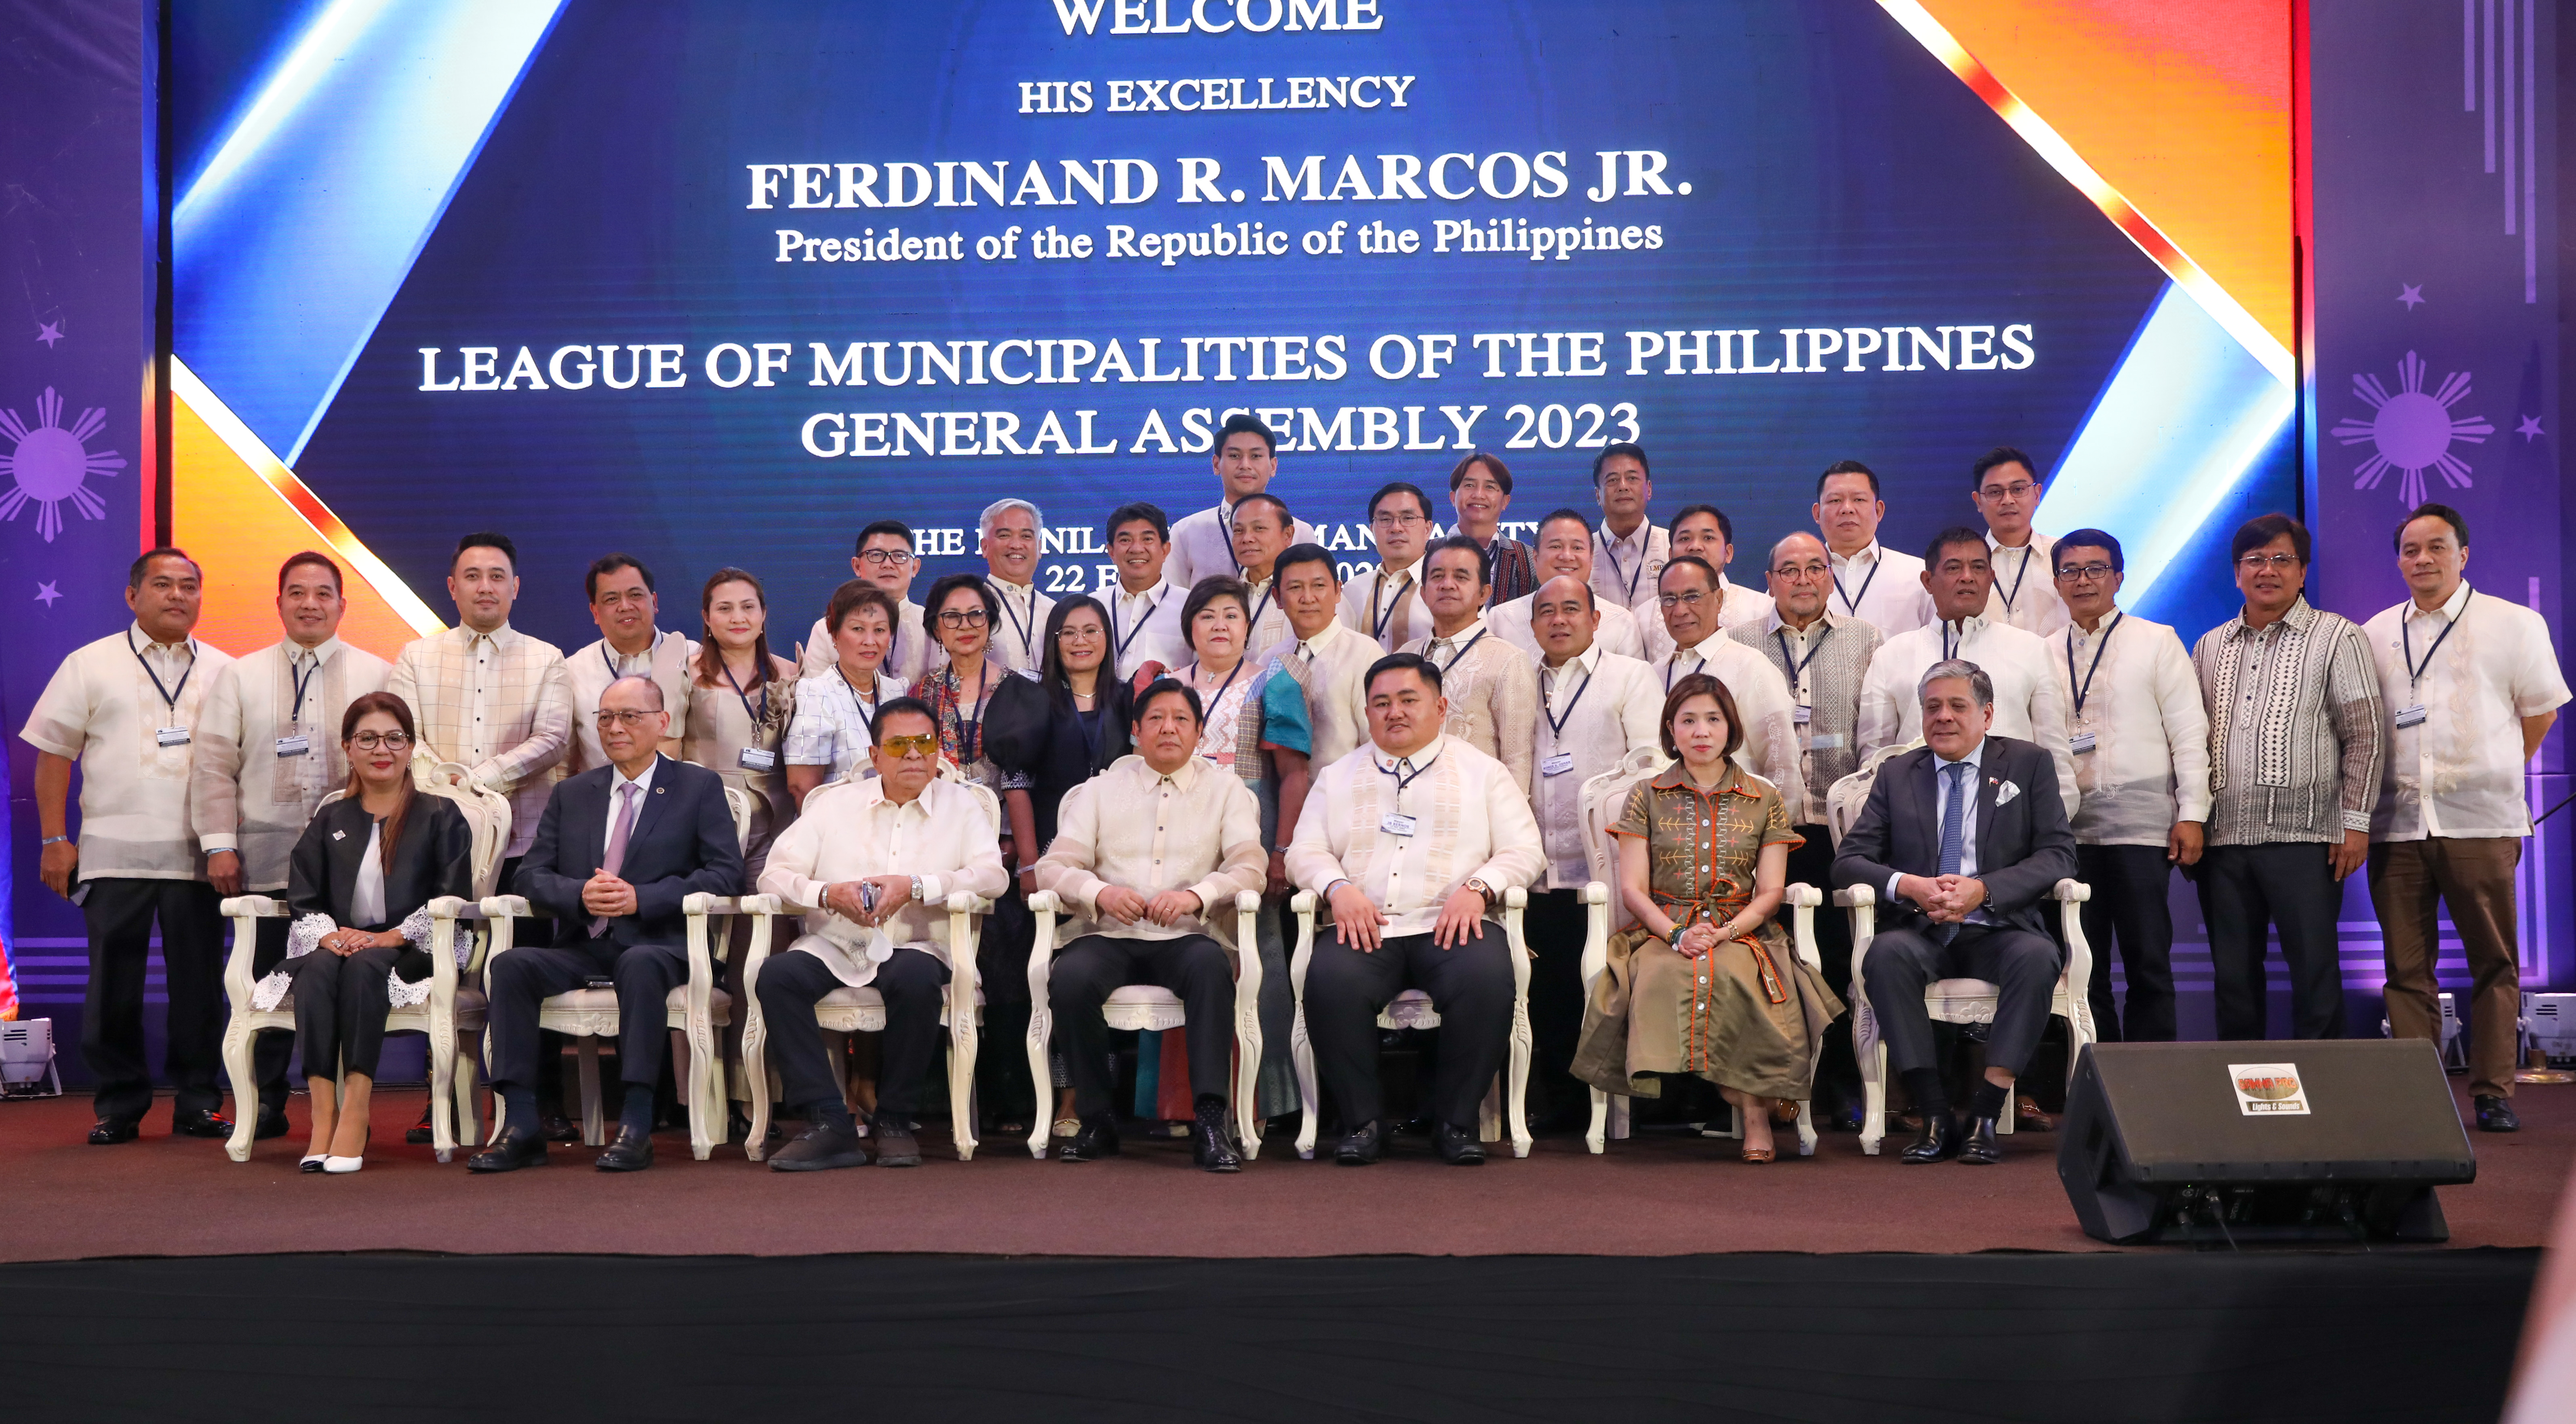 President Ferdinand R. Marcos Jr. leads the 2023 General Assembly of the League of Municipalities of the Philippines